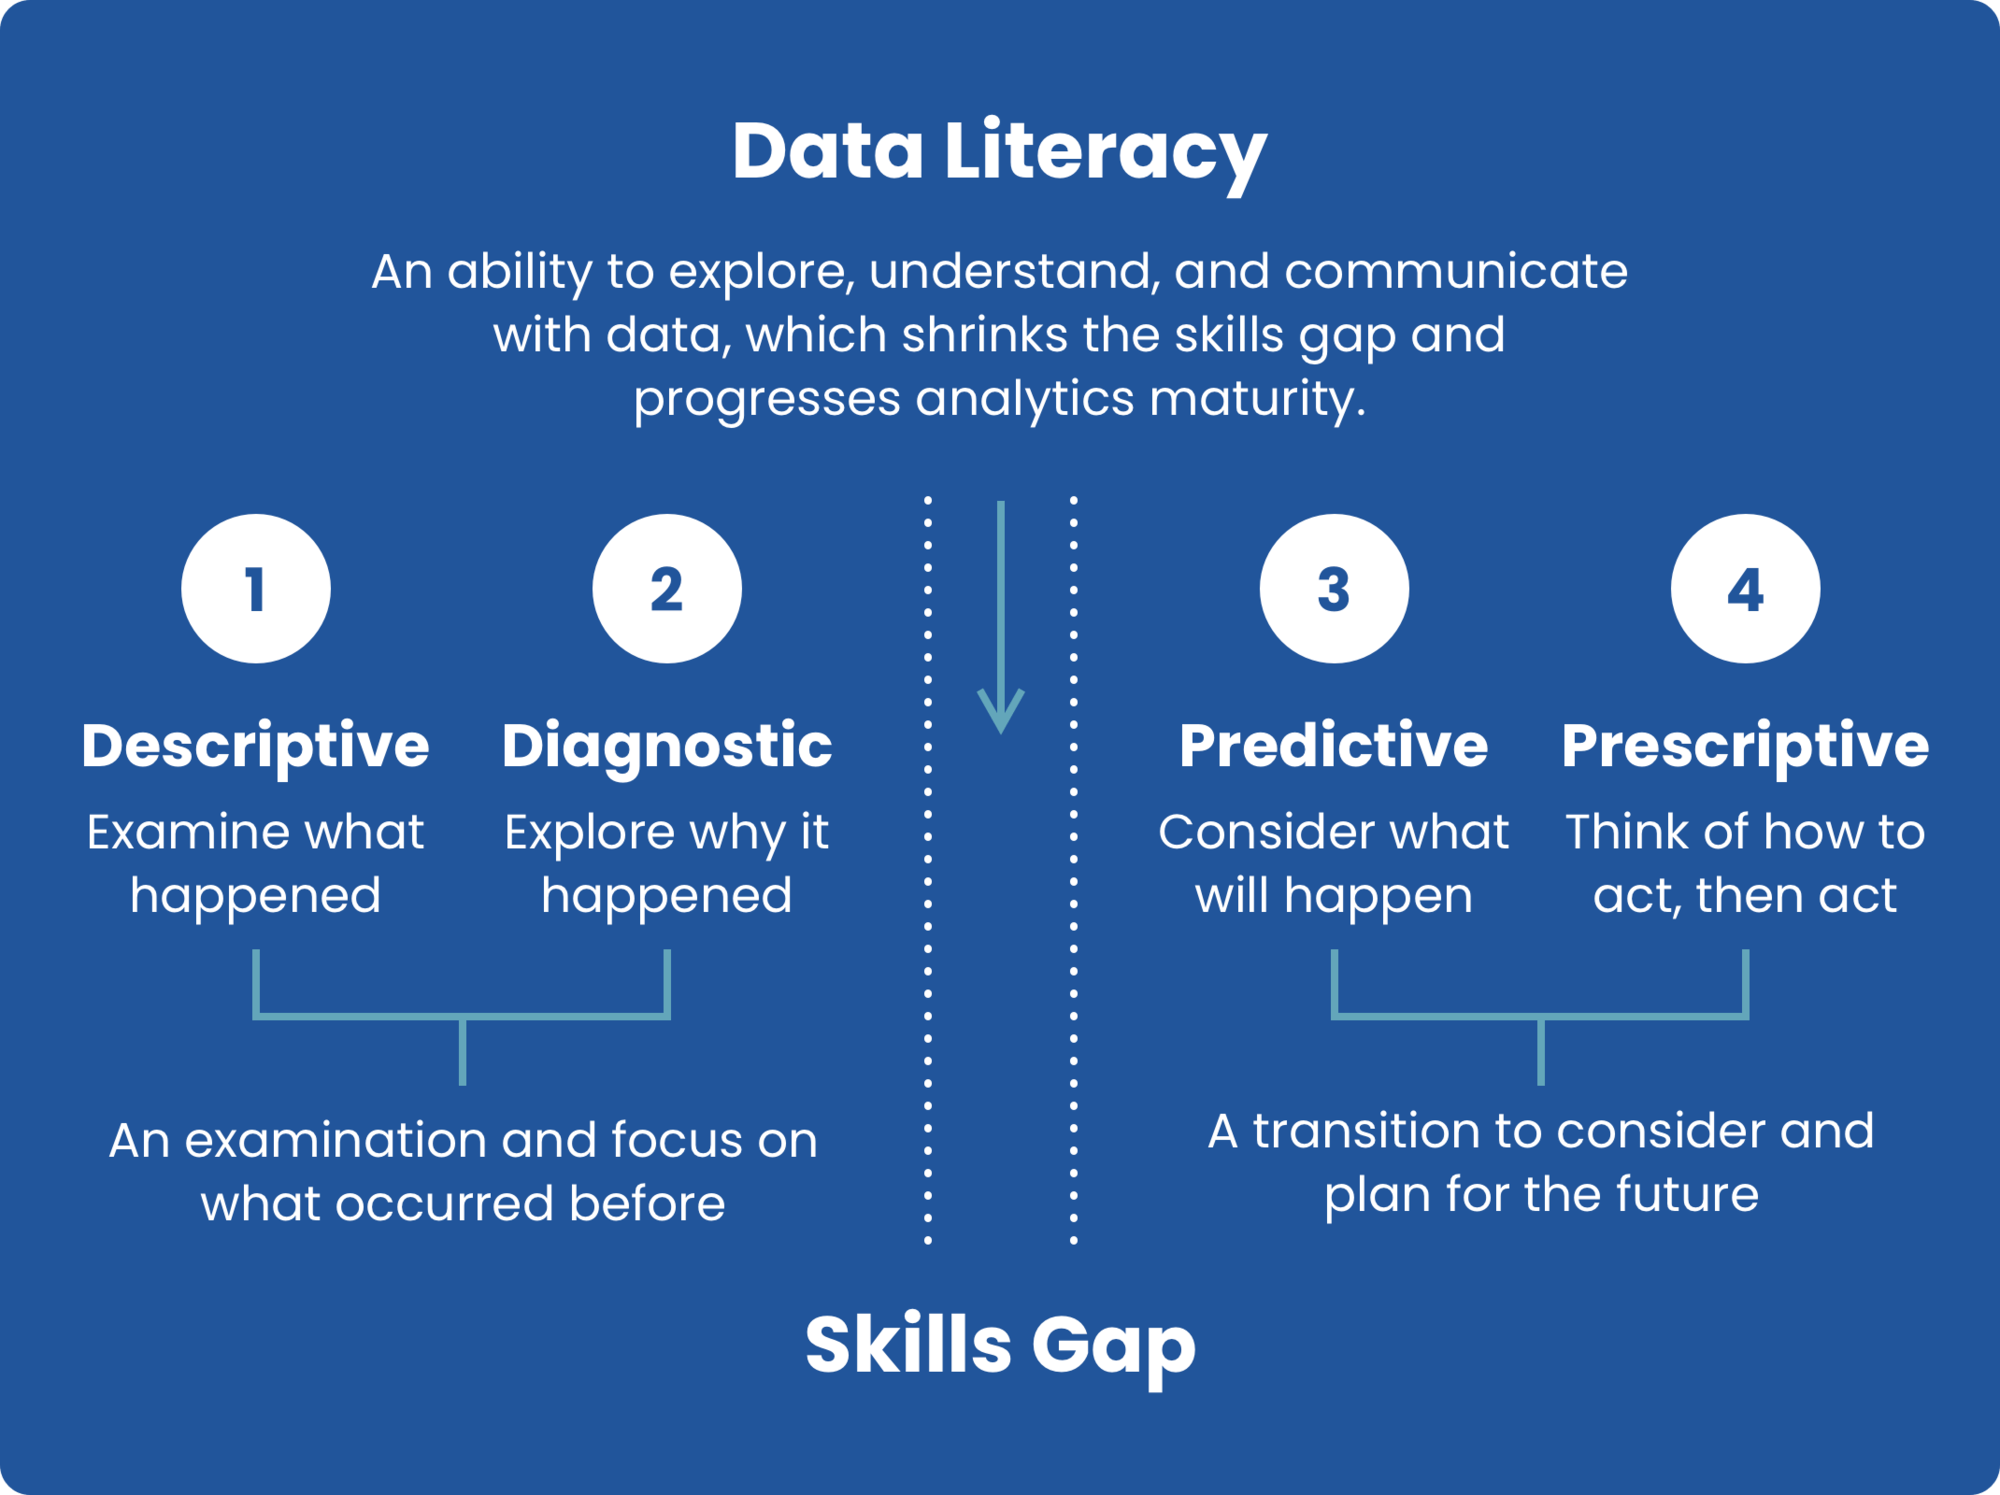 4 levels of analytics maturity (descriptive, diagnostic, predictive, and prescriptive), with data literacy sitting between diagnostic (why it happened) and predictive (what will happen)